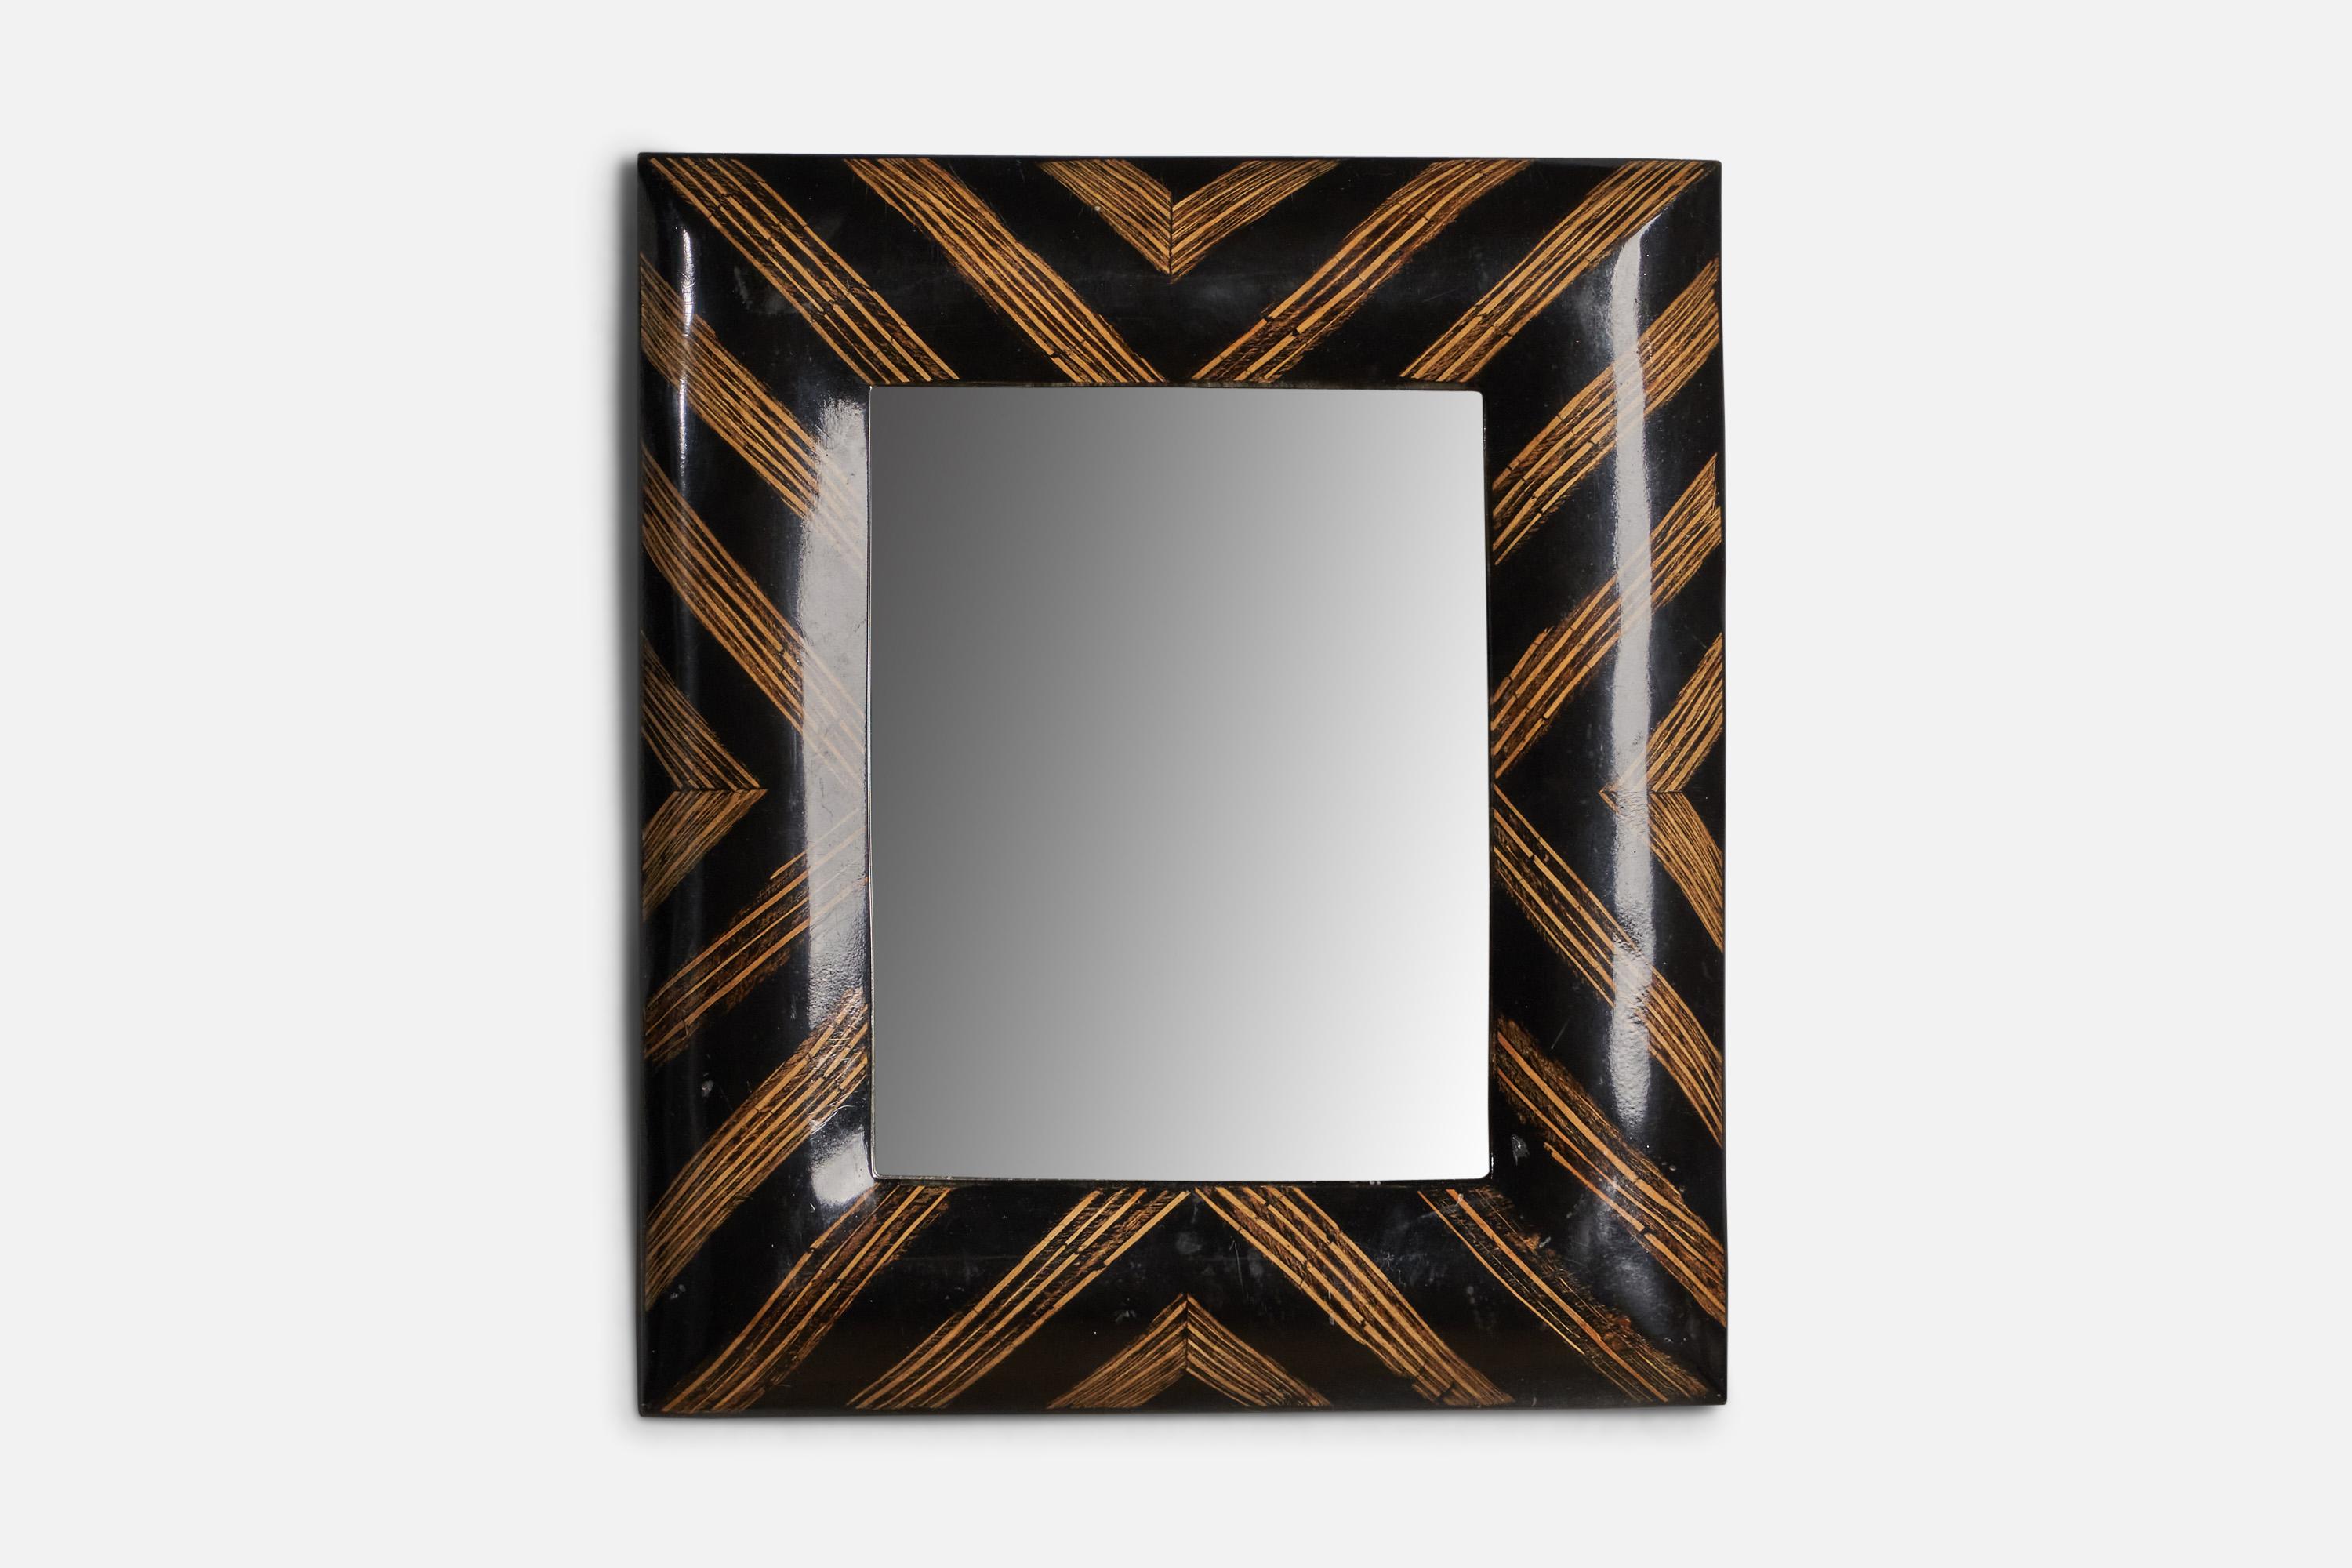 A black and brown resin wall mirror designed and produced in Italy, c. 1940s.